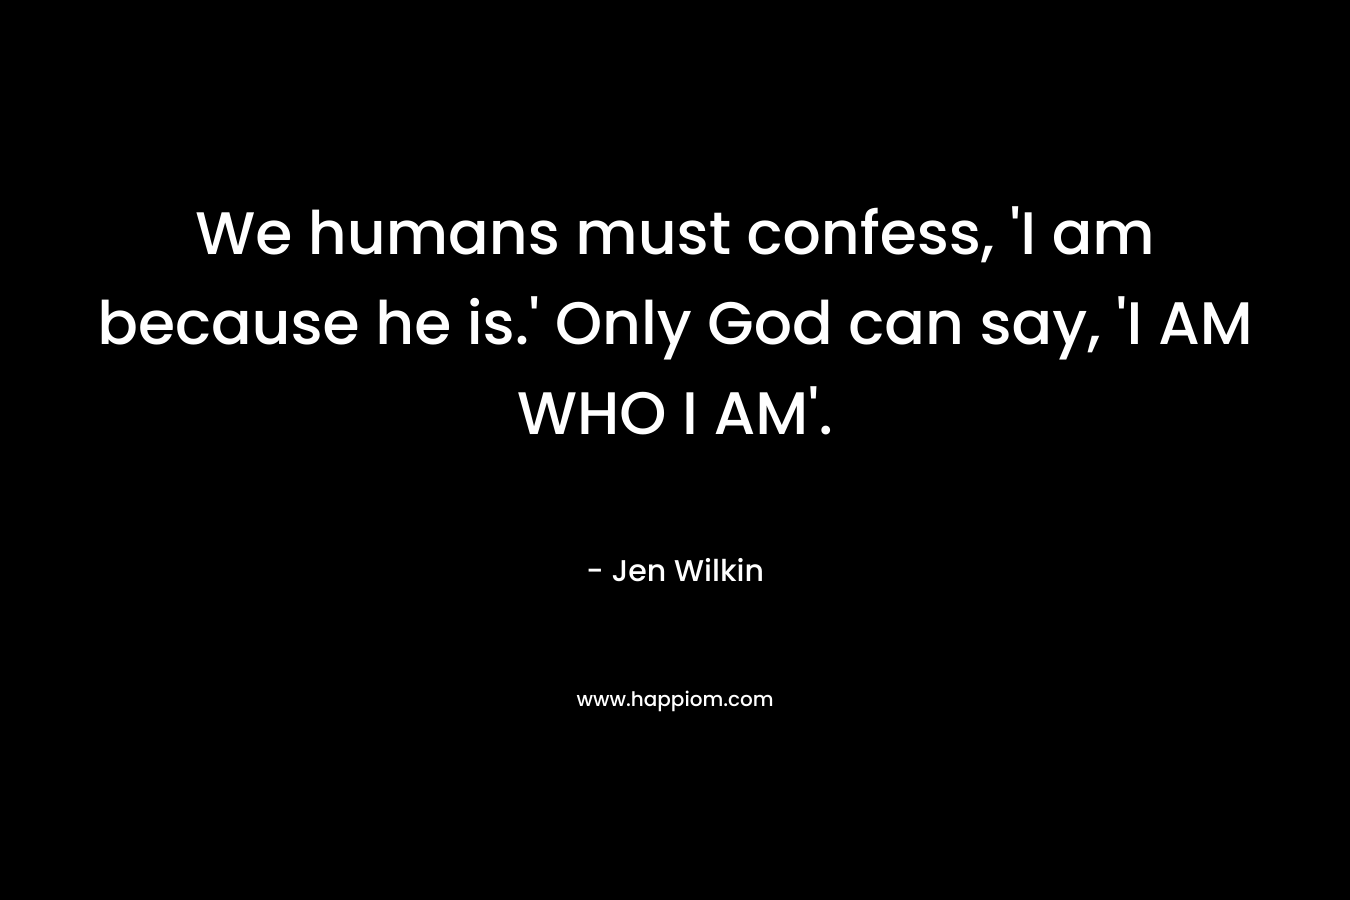 We humans must confess, ‘I am because he is.’ Only God can say, ‘I AM WHO I AM’. – Jen Wilkin